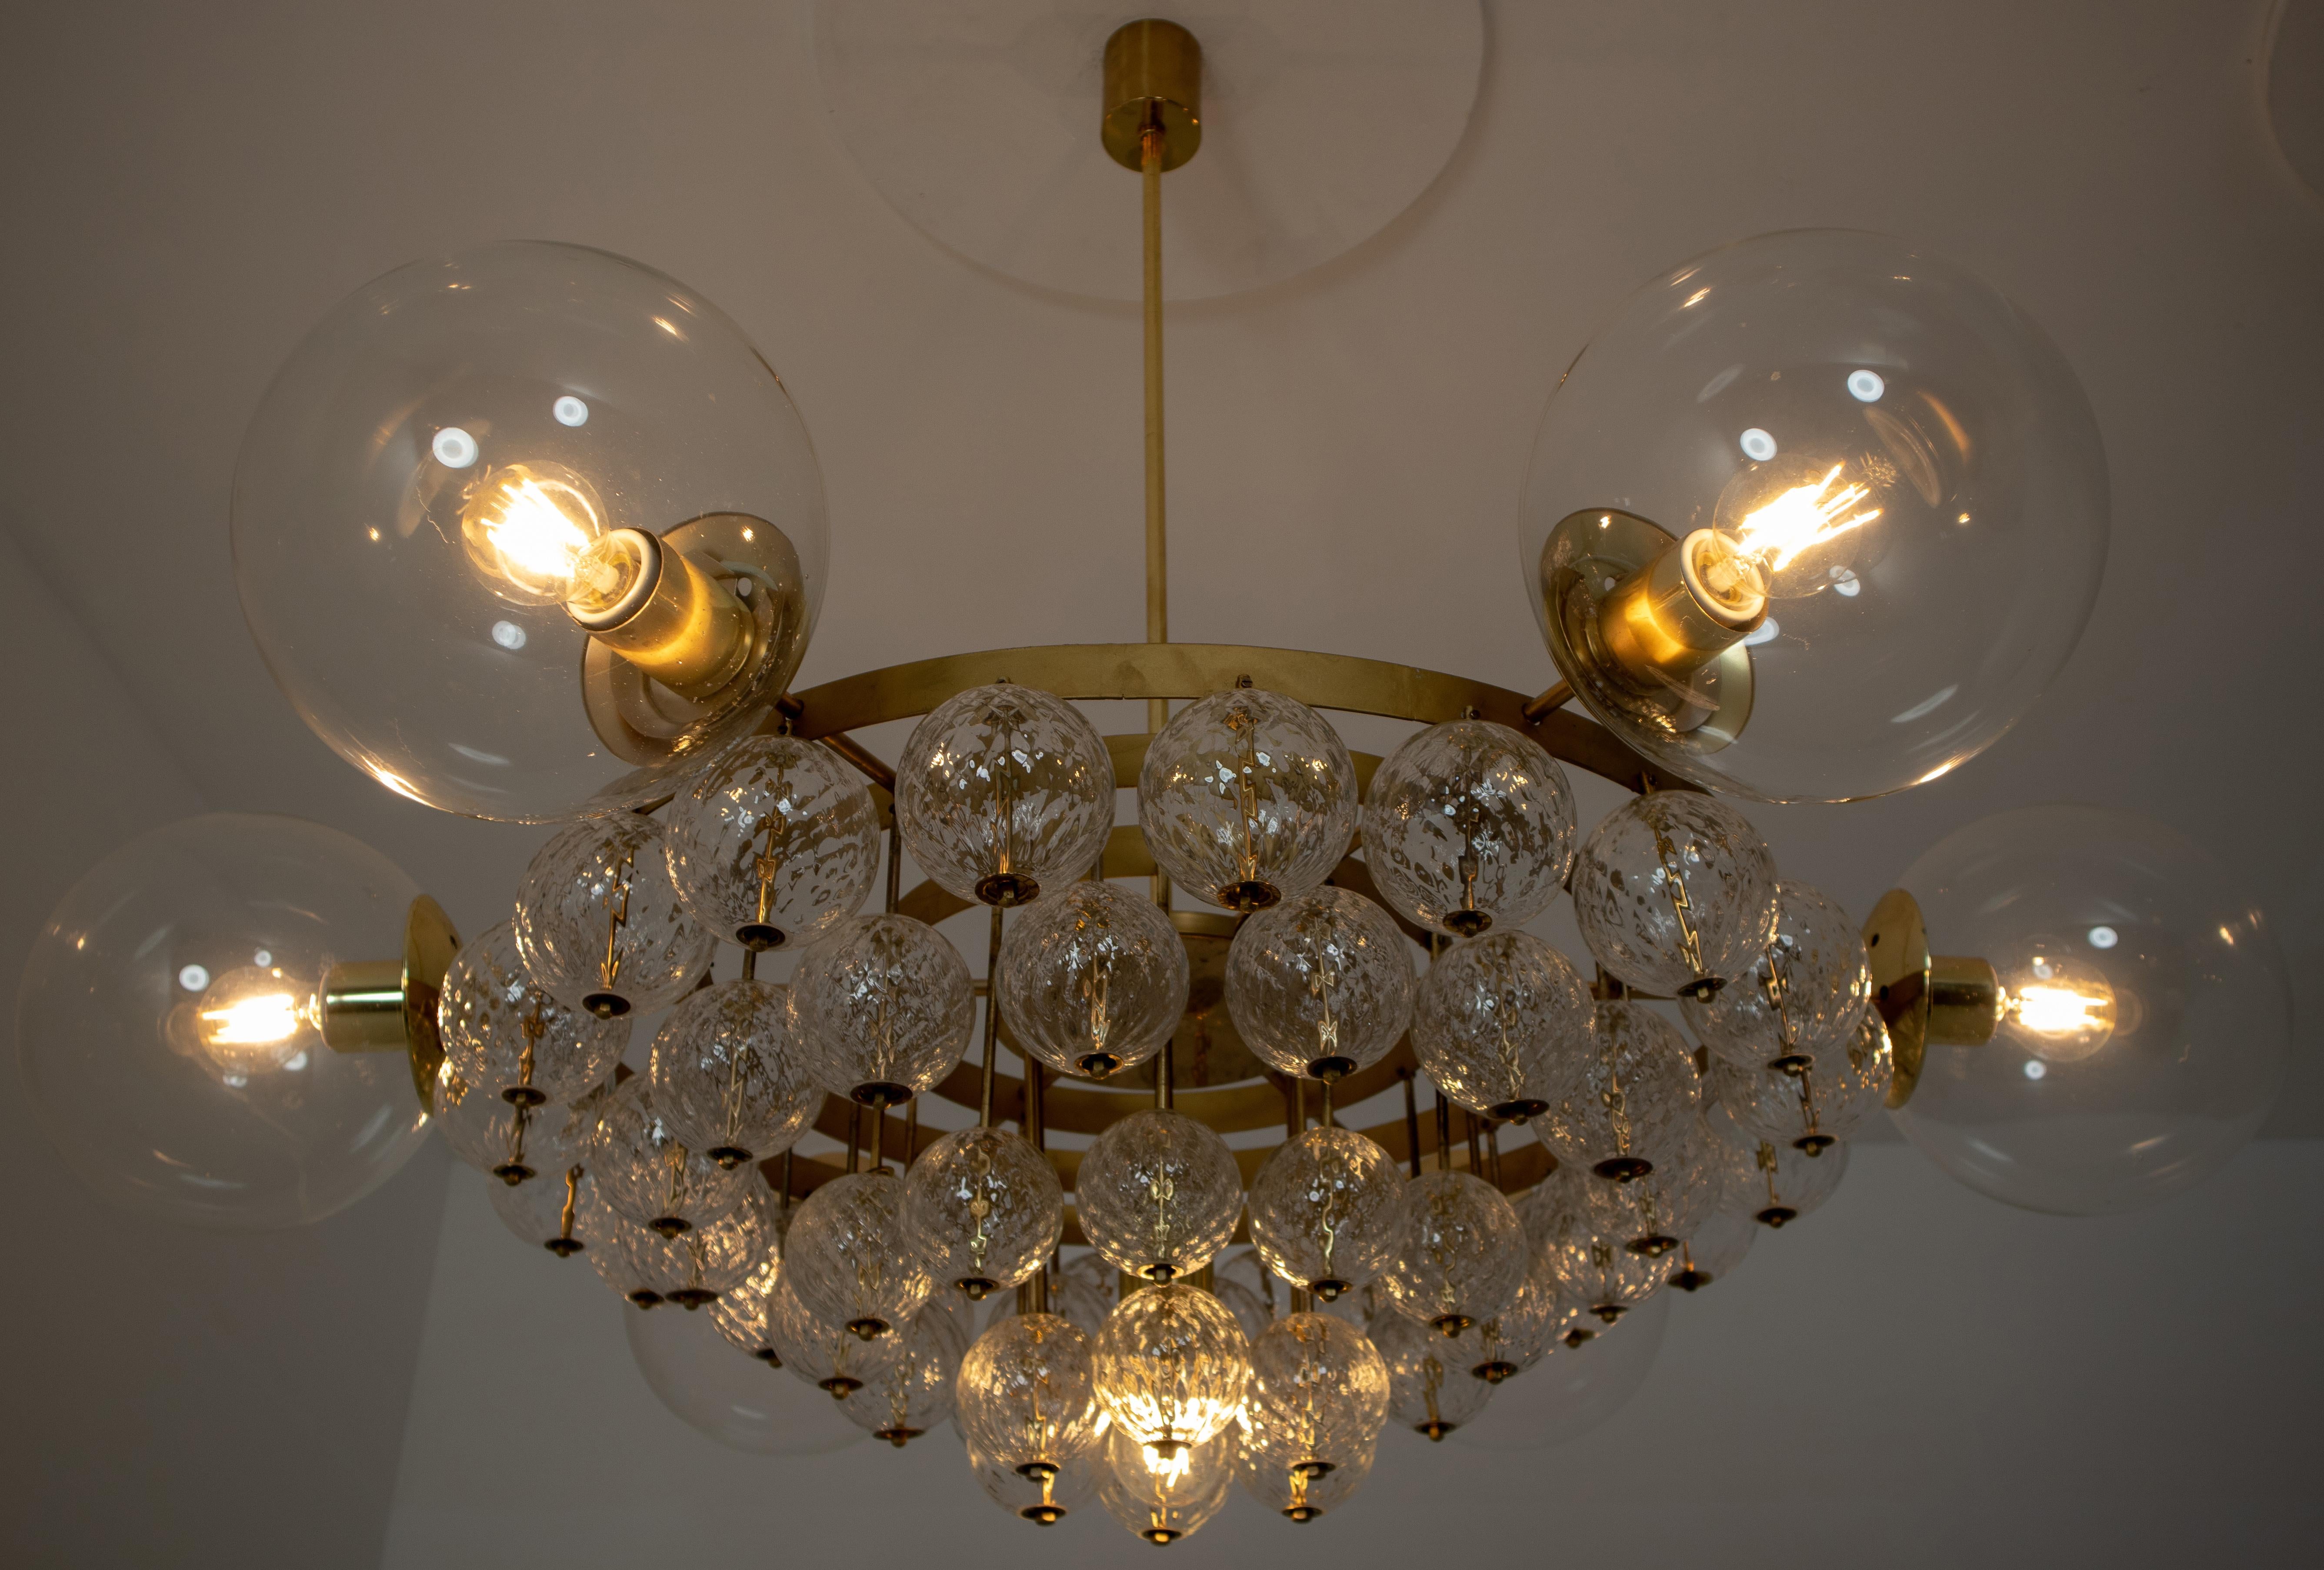 Large Hotel Chandeliers with Brass Fixture and Structured Glass Globes For Sale 6